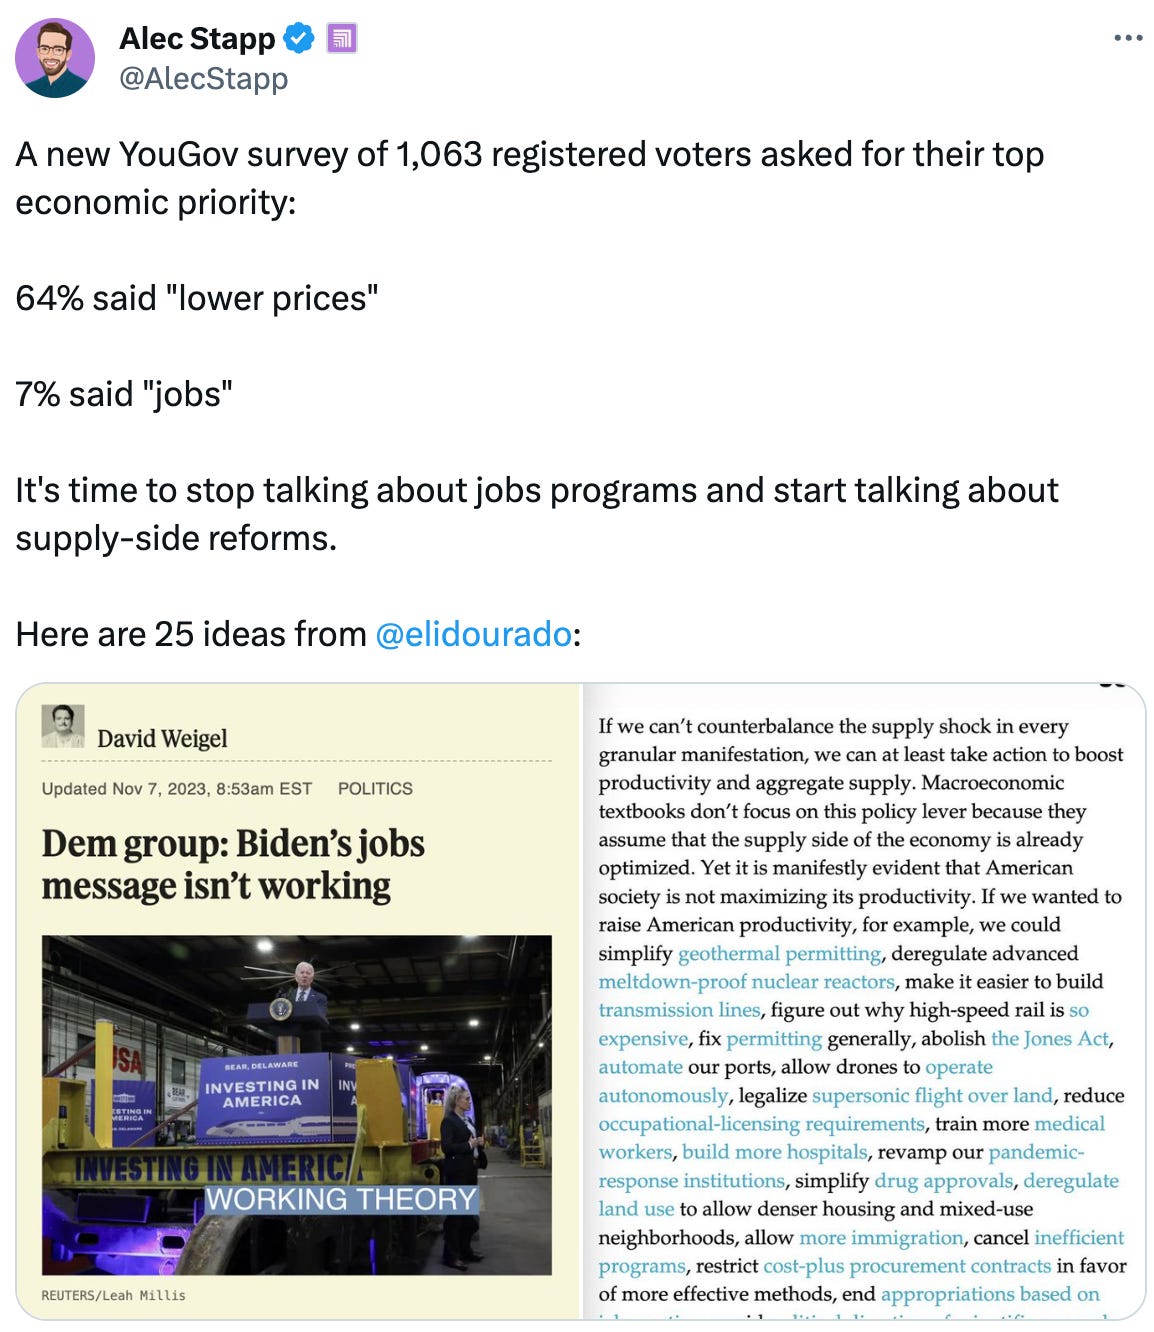  See new posts Conversation Alec Stapp  @AlecStapp A new YouGov survey of 1,063 registered voters asked for their top economic priority:  64% said "lower prices"  7% said "jobs"  It's time to stop talking about jobs programs and start talking about supply-side reforms.  Here are 25 ideas from  @elidourado :